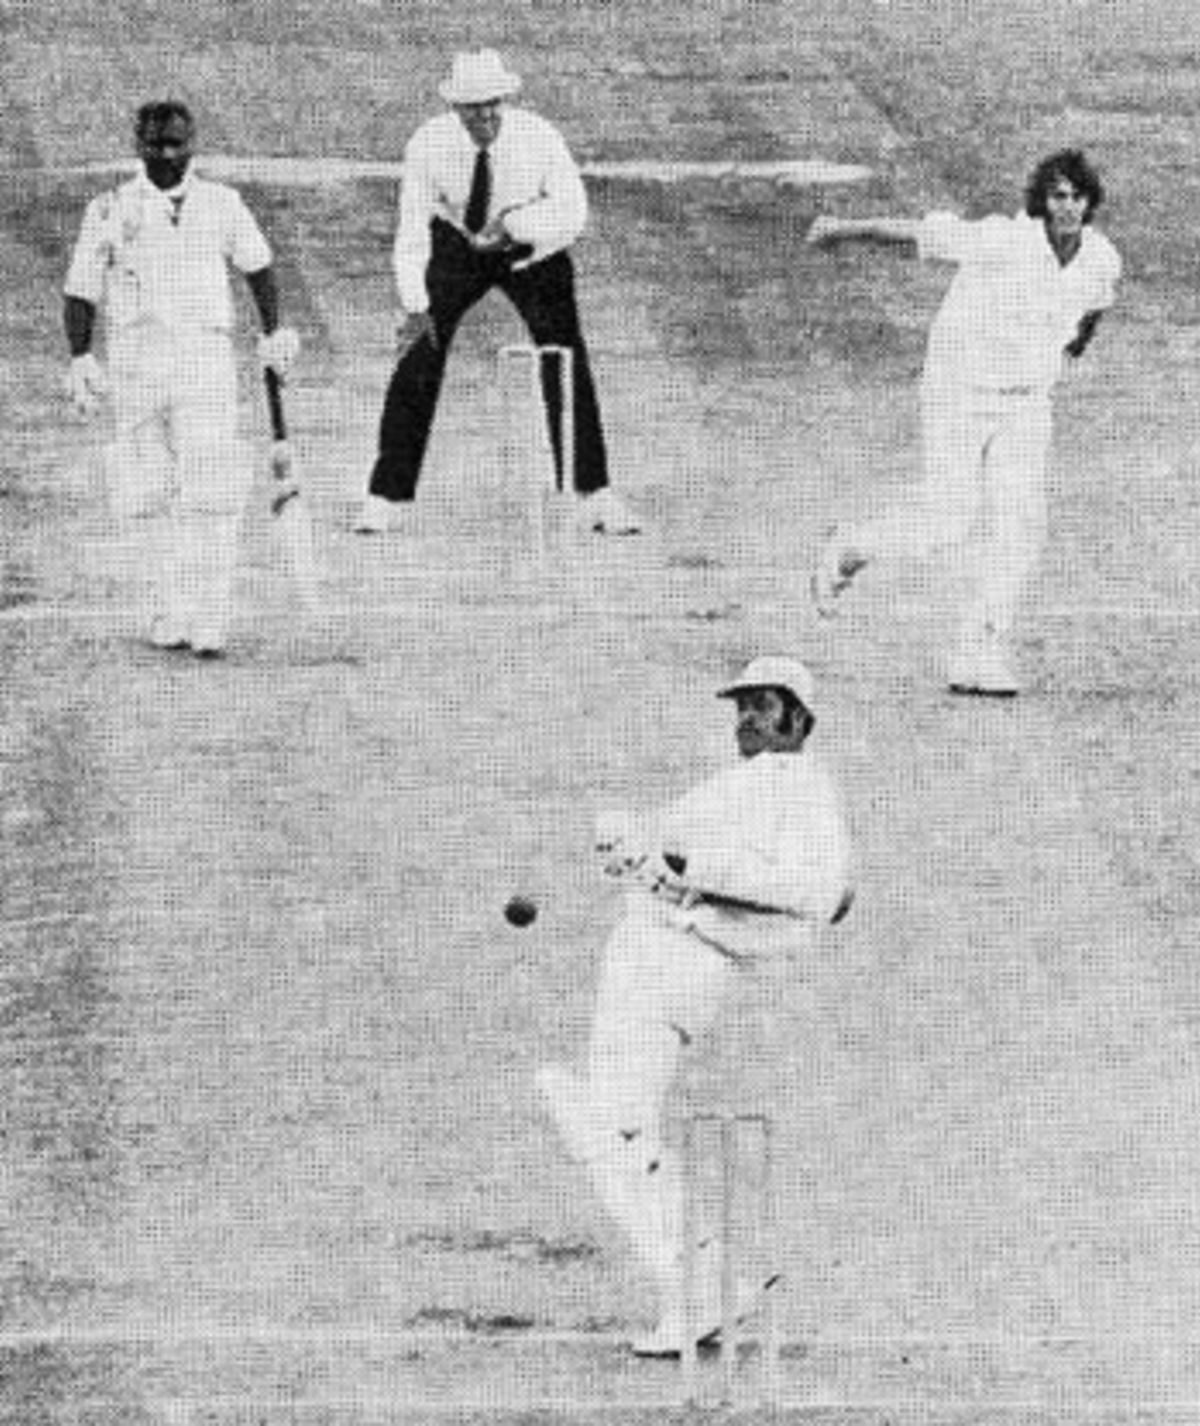 Hylton Ackerman sways out the way of a Dennis Lillee bouncer, Australia v World XI, Perth, December 1971